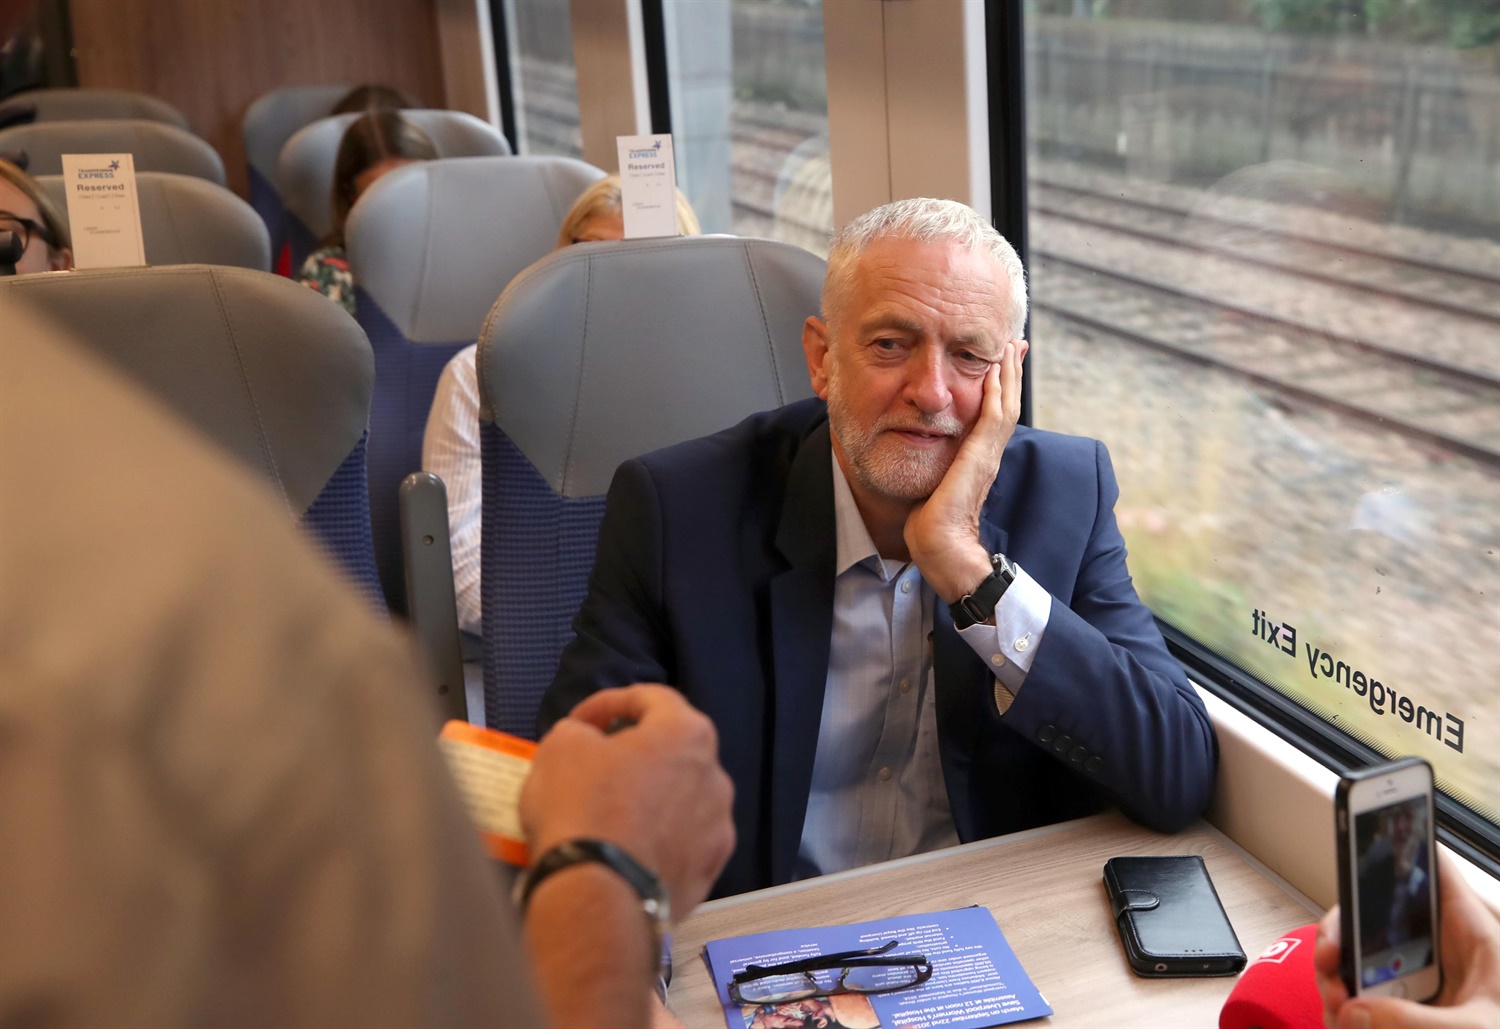 Corbyn pledges £10bn for Northern Crossrail project